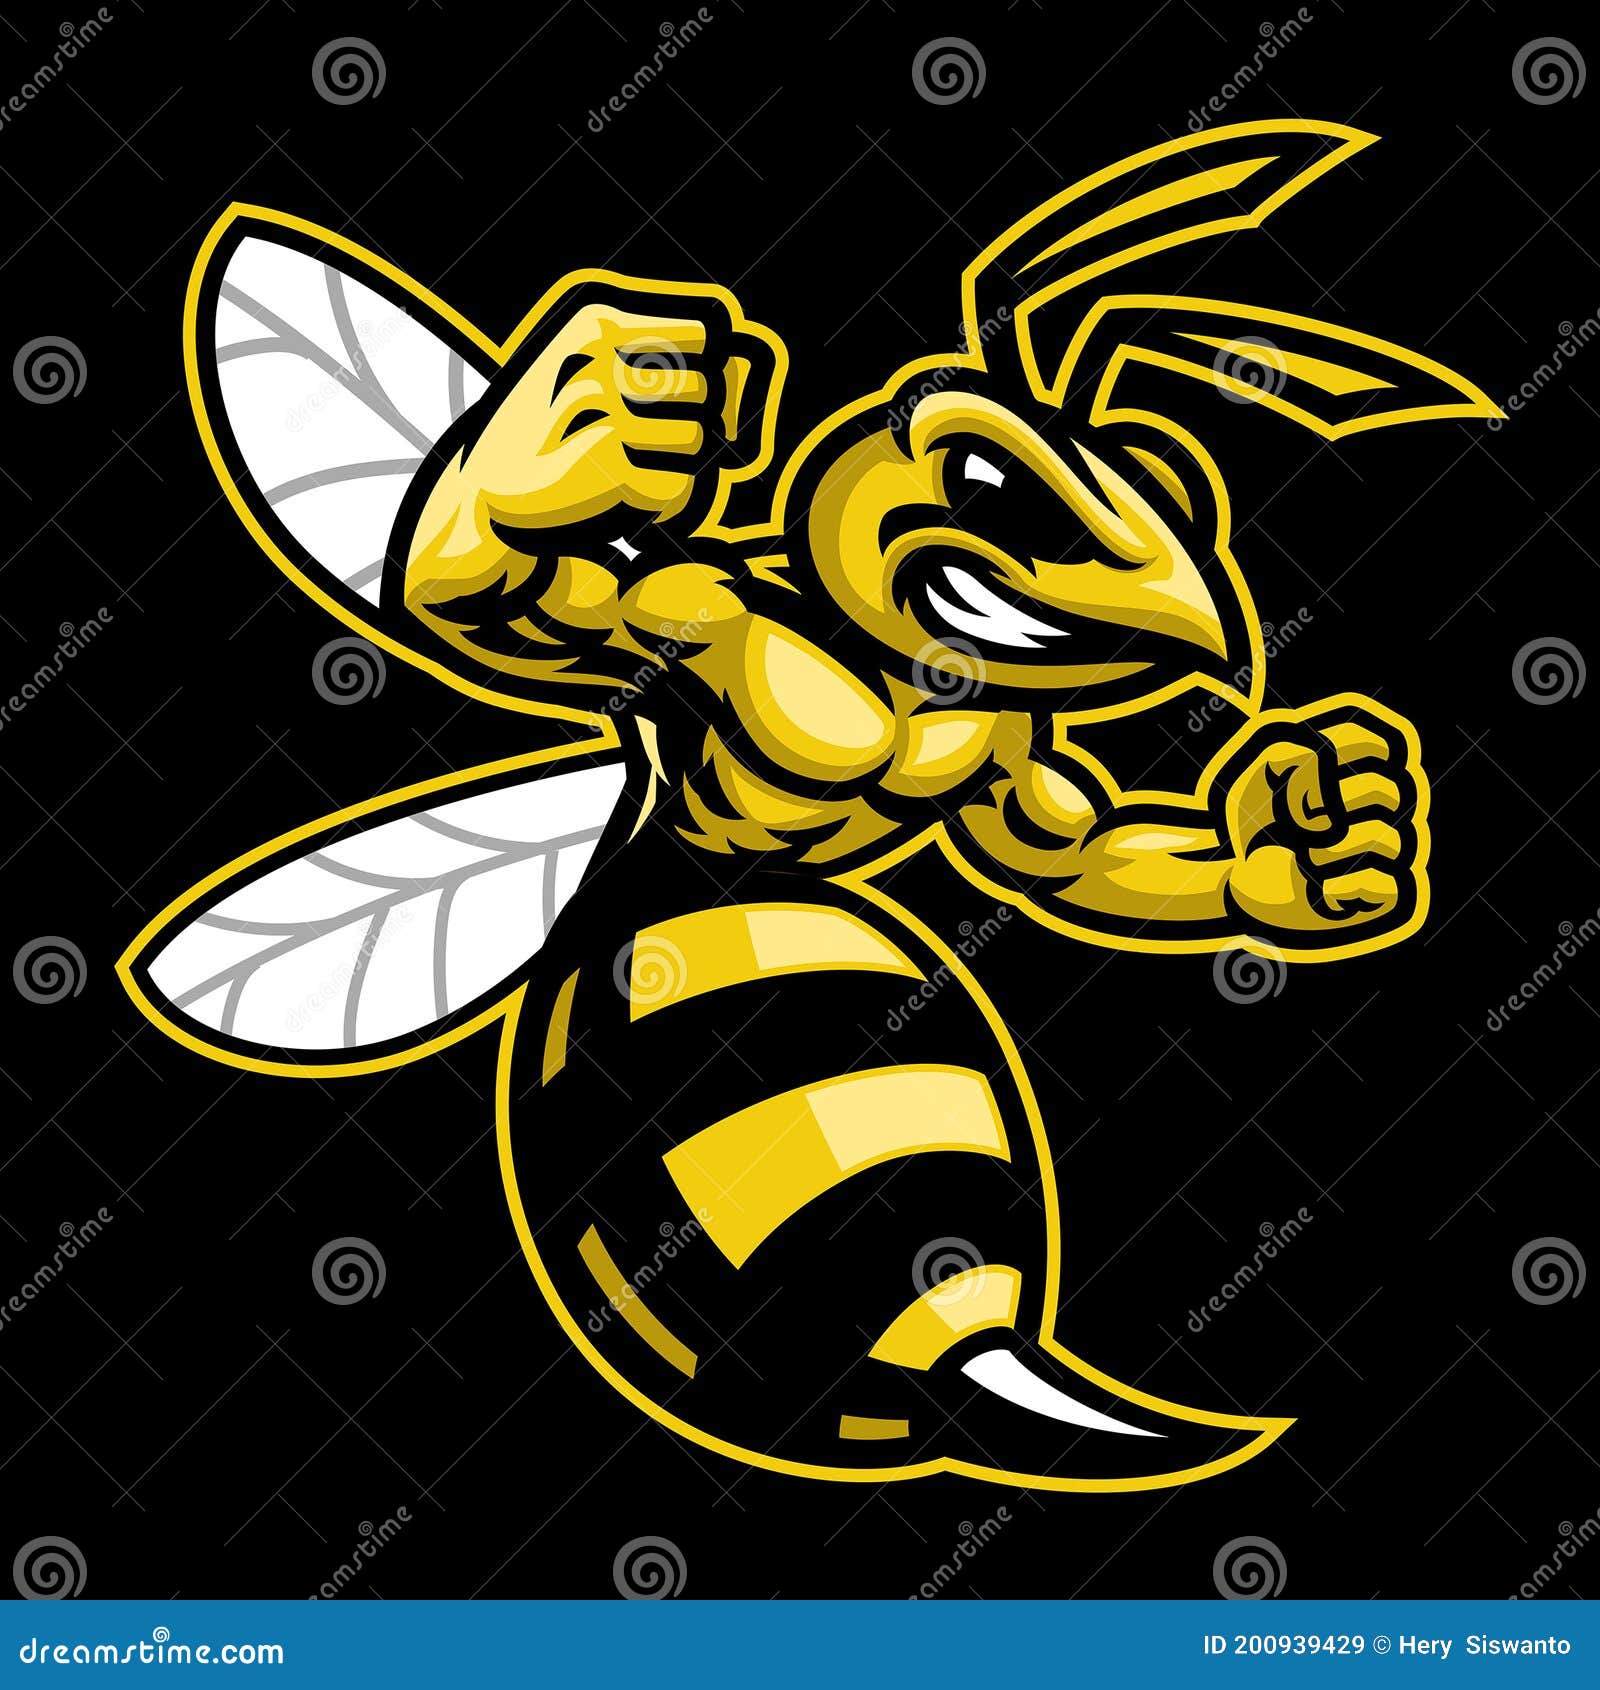 angry hornet wasp mascot